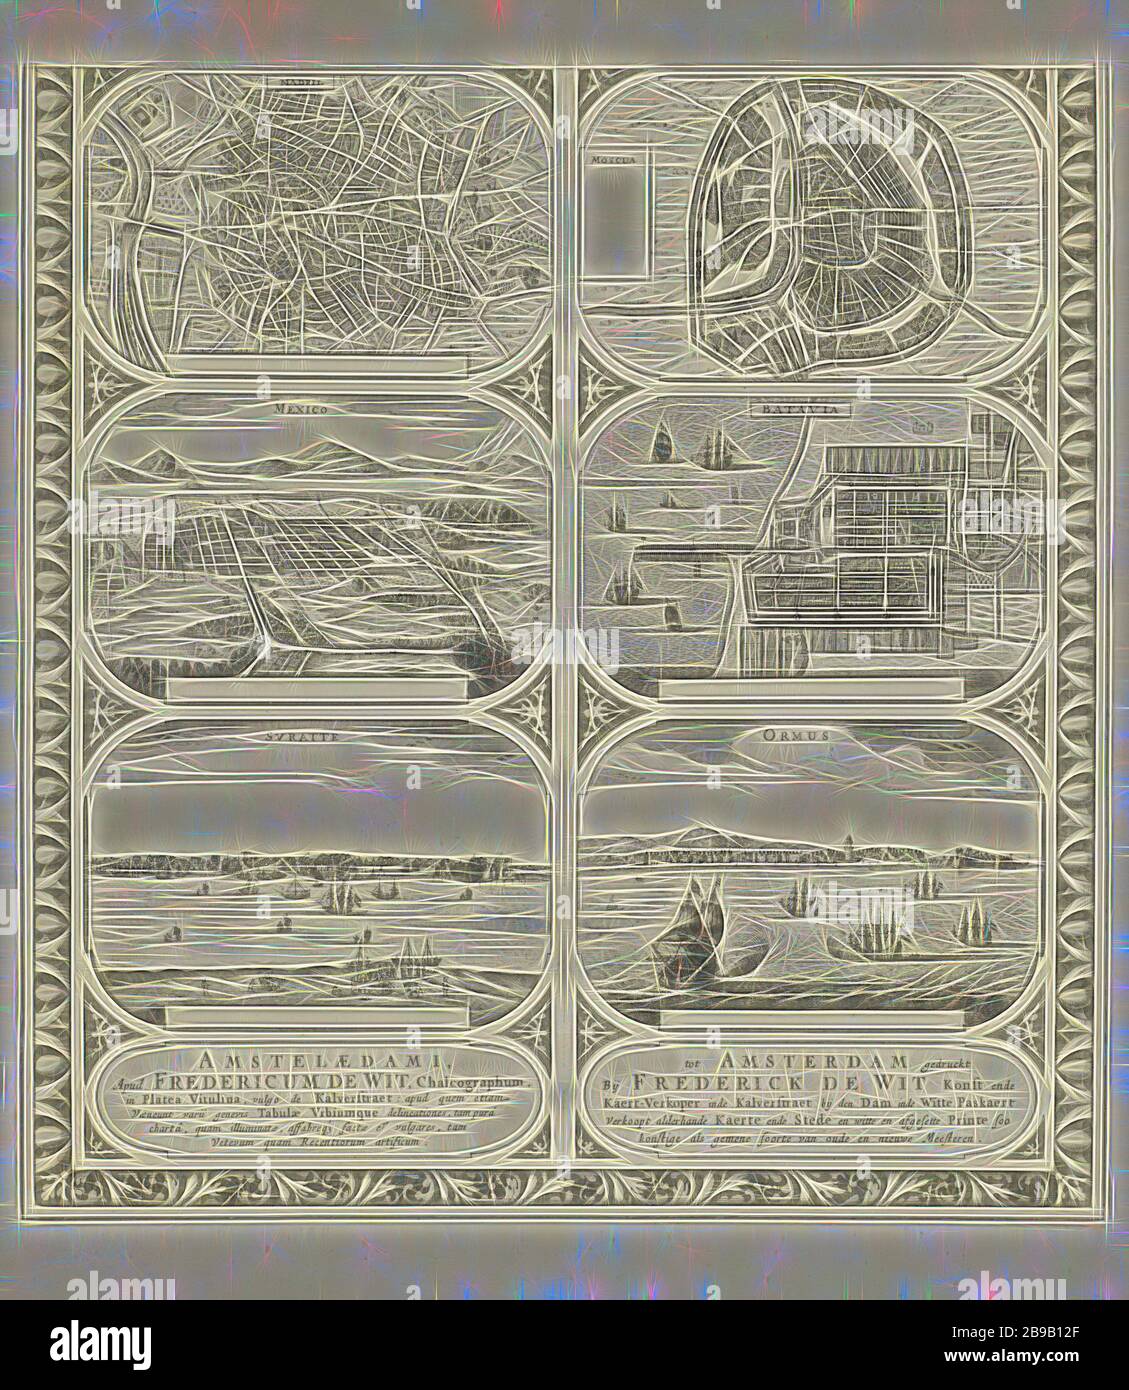 Madril / Mexico / Svratte / Moscua / Batavia / Ormus (title on object), Sheet with two vertical strips, each with three floor plans of or views of the cities of Madrid, Mexico, Suratte, Moscow, Batavia and Hormoz. Below the address of the publisher in Latin and Dutch. Uncut leaf with six border figures intended to be glued in strips as a frame to map a continent, maps of cities, prospect of city, town panorama, silhouette of city, Madrid, Batavia, Mexico City, Hormoz, Jazireh-ye, anonymous, Amsterdam, 1670 - 1672, paper, etching, h 453 mm × w 426 mm, Reimagined by Gibon, design of warm cheerfu Stock Photo